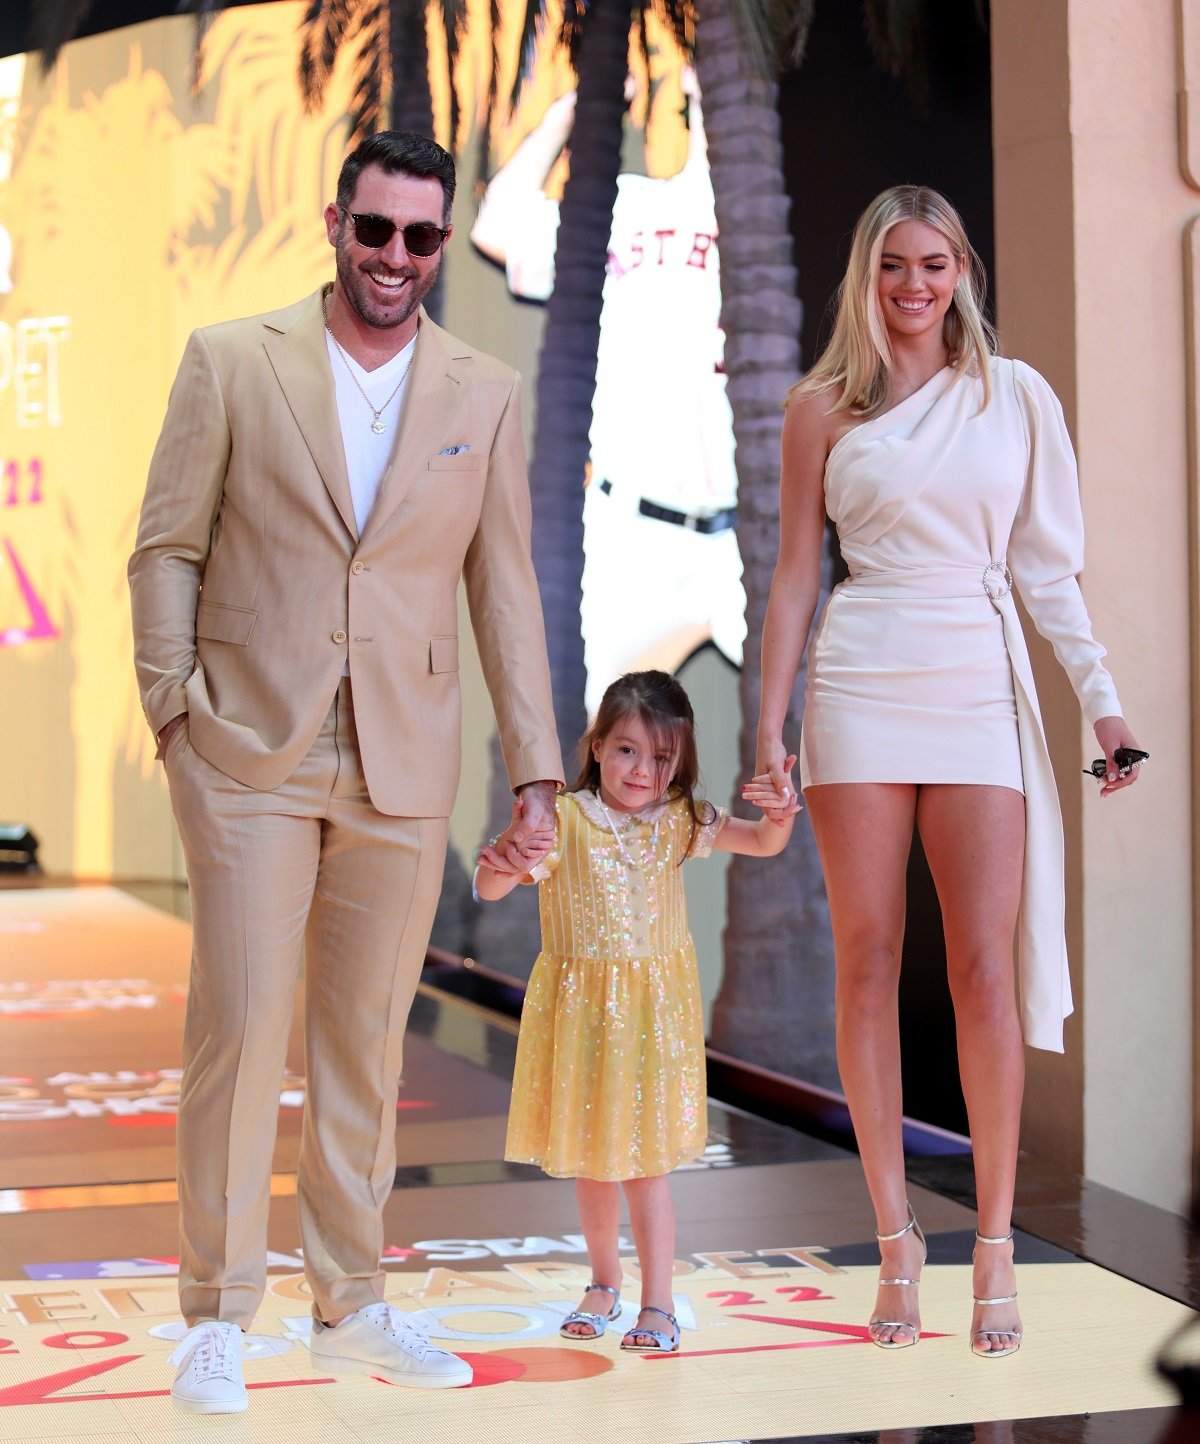 Justin Verlander, Kate Upton, and their daughter arrive at the 2022 MLB All-Star Game Red Carpet Show